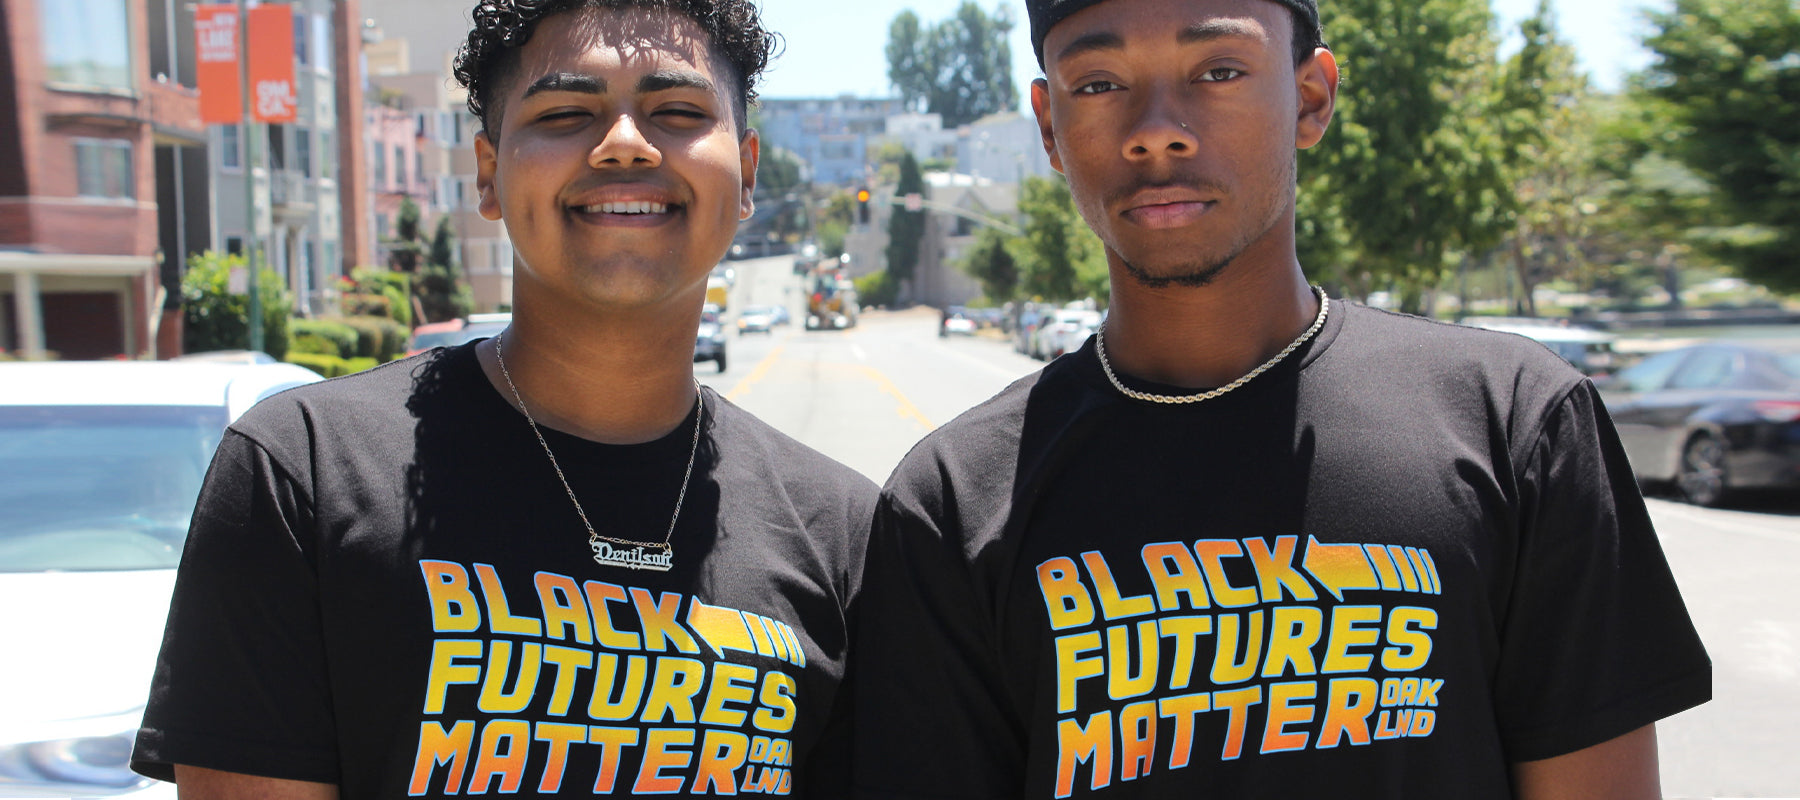 Two Men in Oakland Wearing black t-Shirts with “Black Futures Matter” graphic.